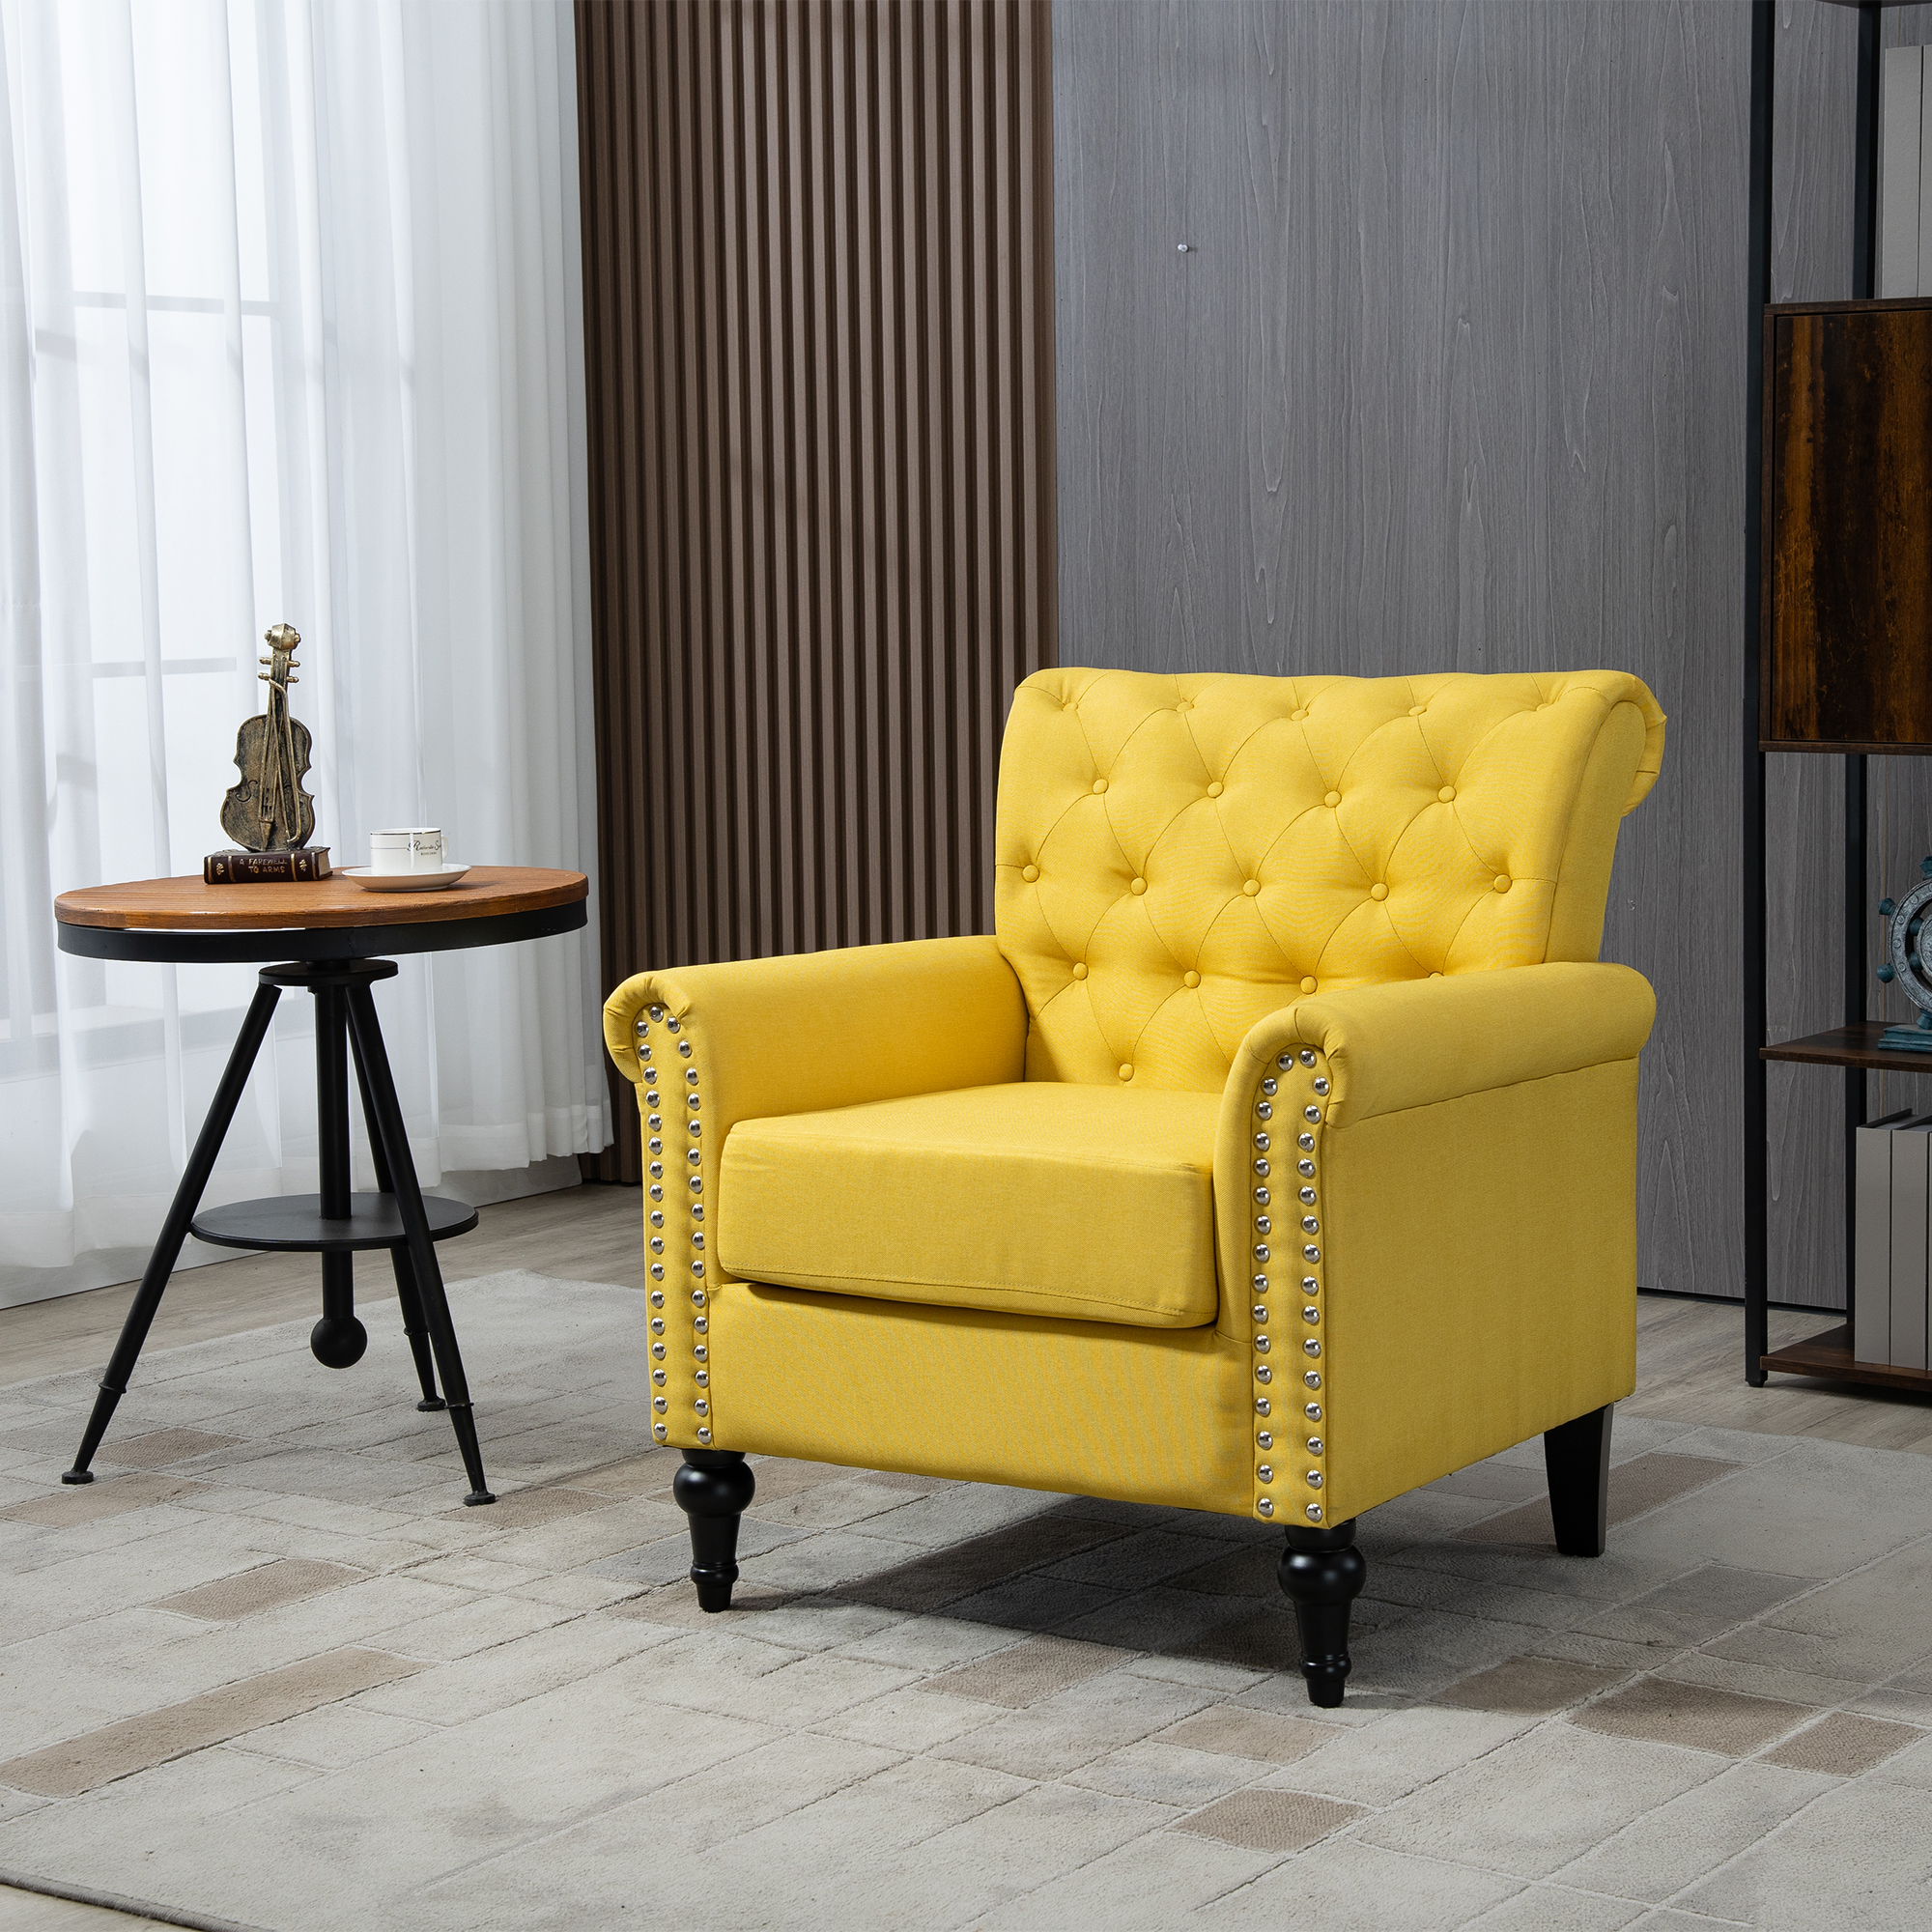 Mid-Century Modern Accent Chair, Velvet Armchair w/Tufted Back/Wood Legs, Upholstered Lounge Arm Chair Single Sofa for Living Room Bedroom, YELLOW-CASAINC